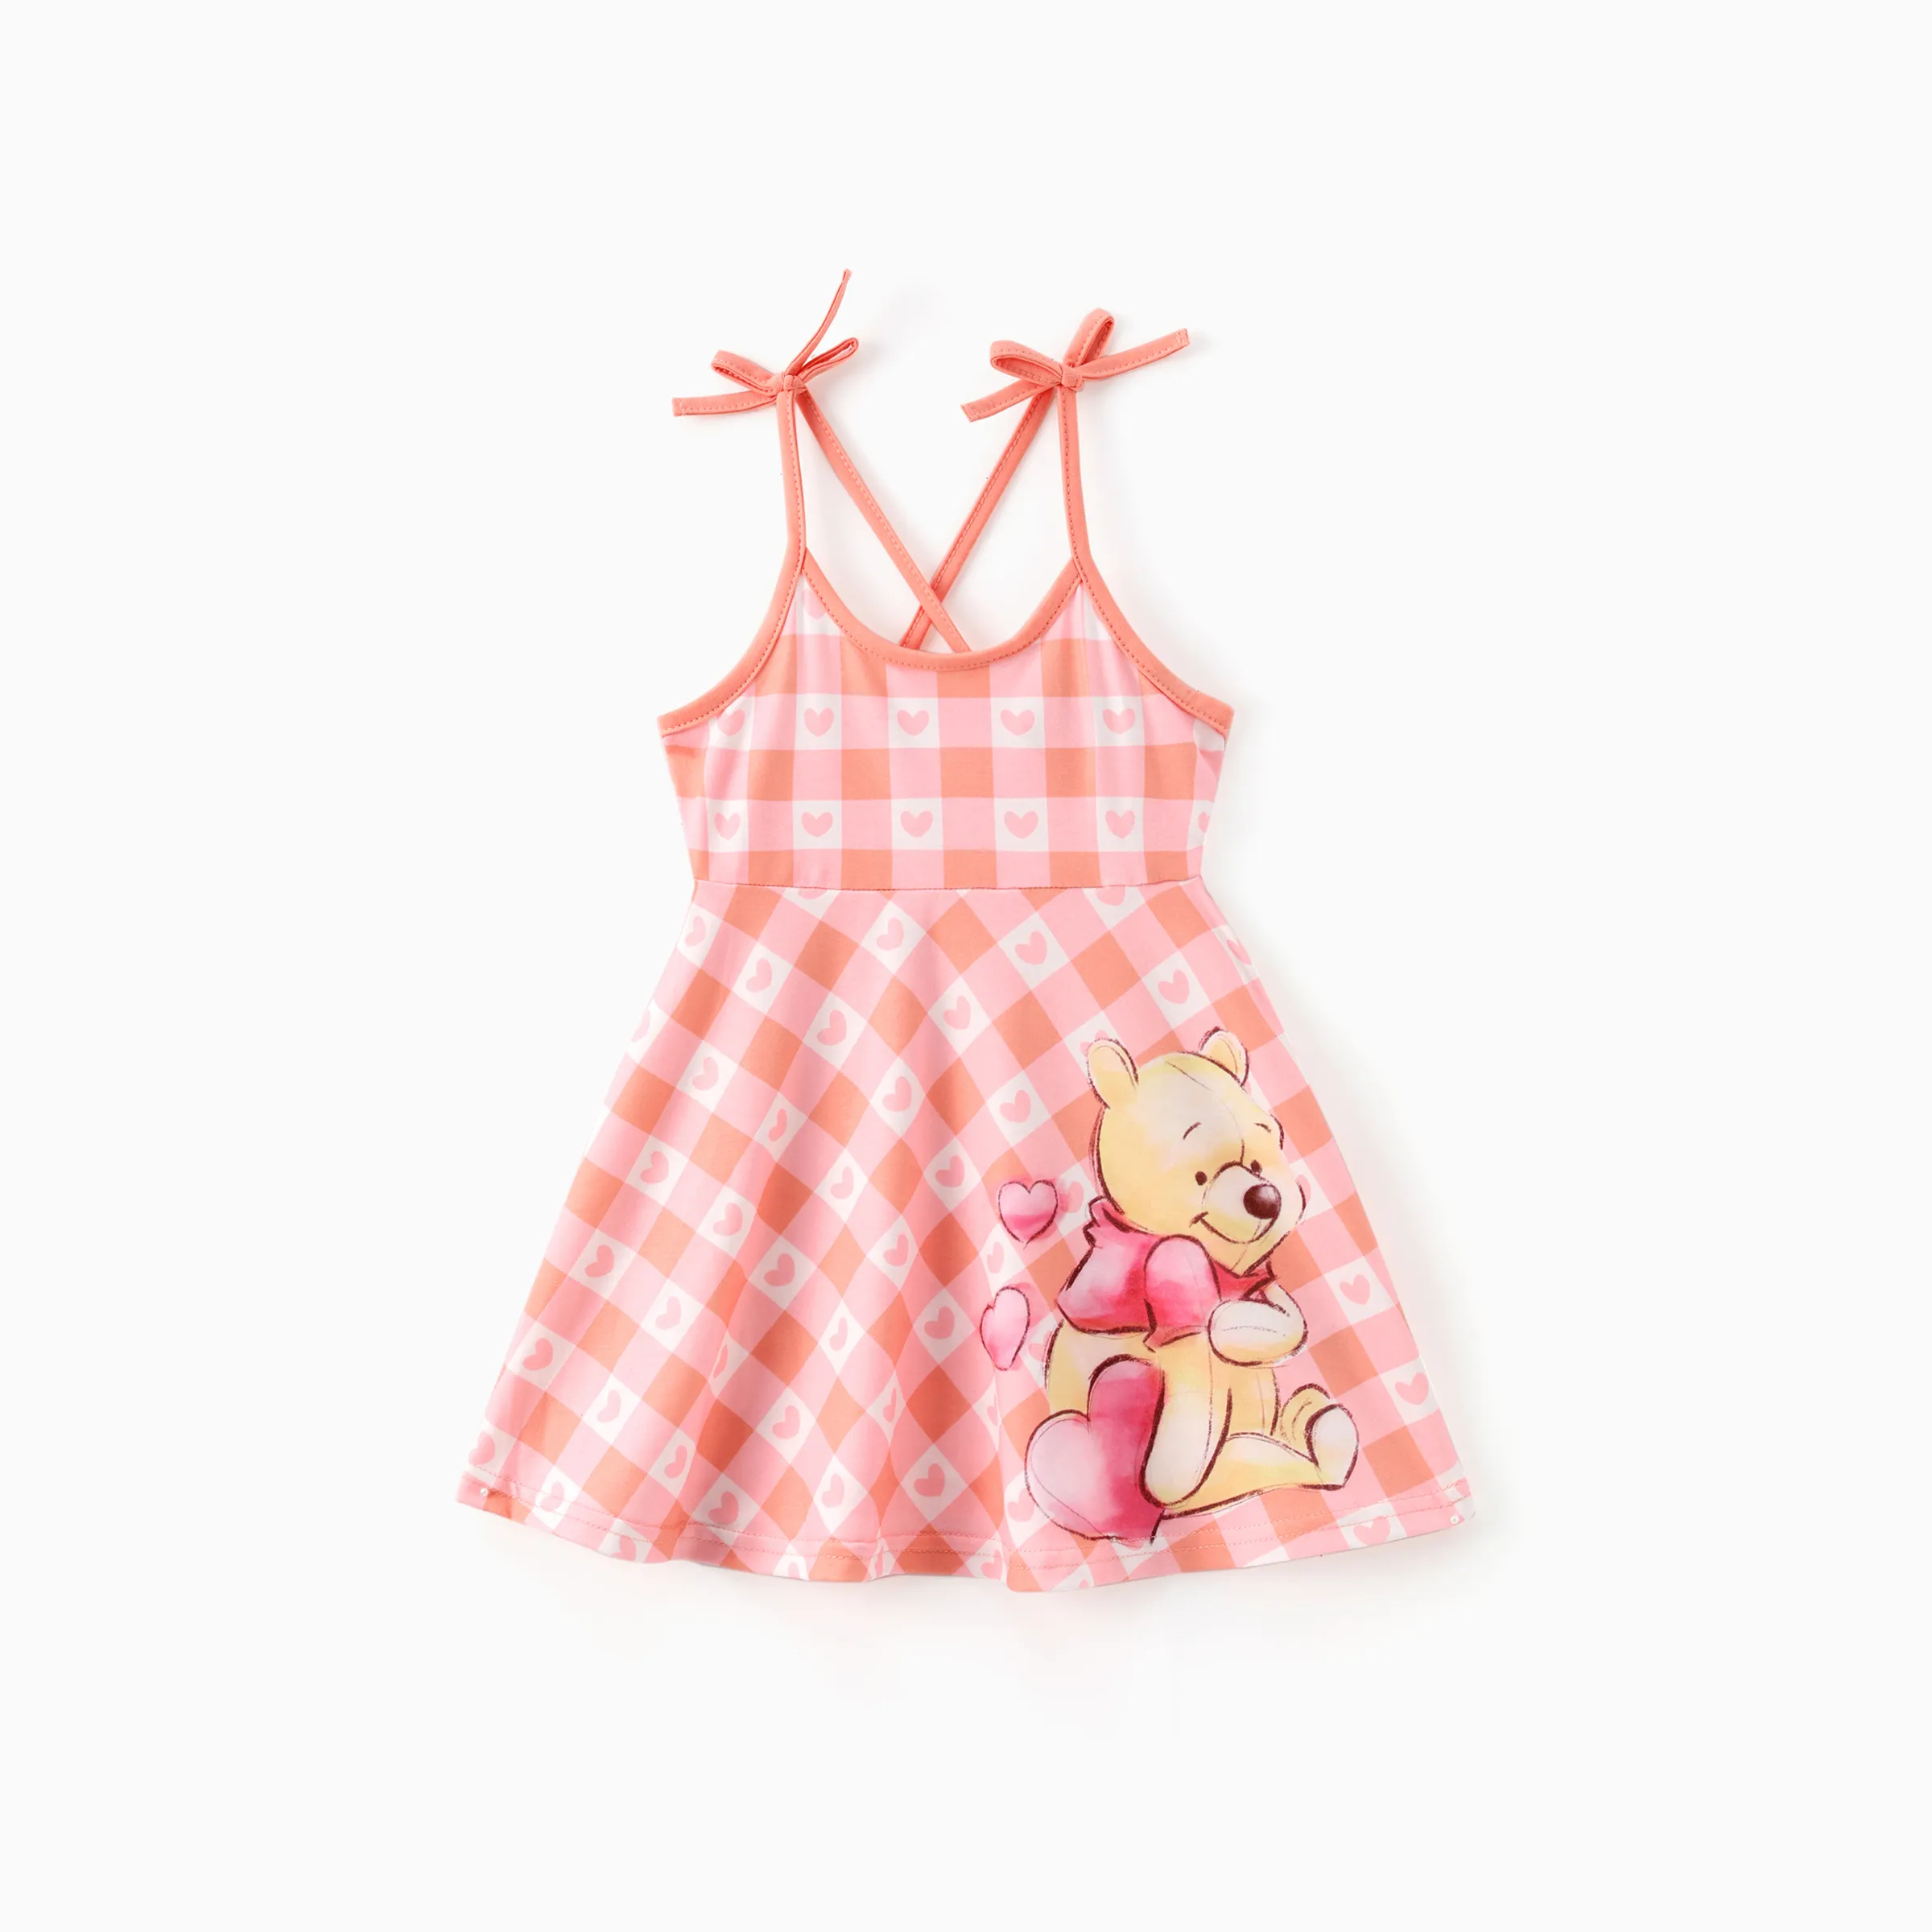 

Disney Winnie the Pooh Toddler Girls 1pc Naia™ Pink and White Plaid with Heart Pattern Spaghetti Strap Dress